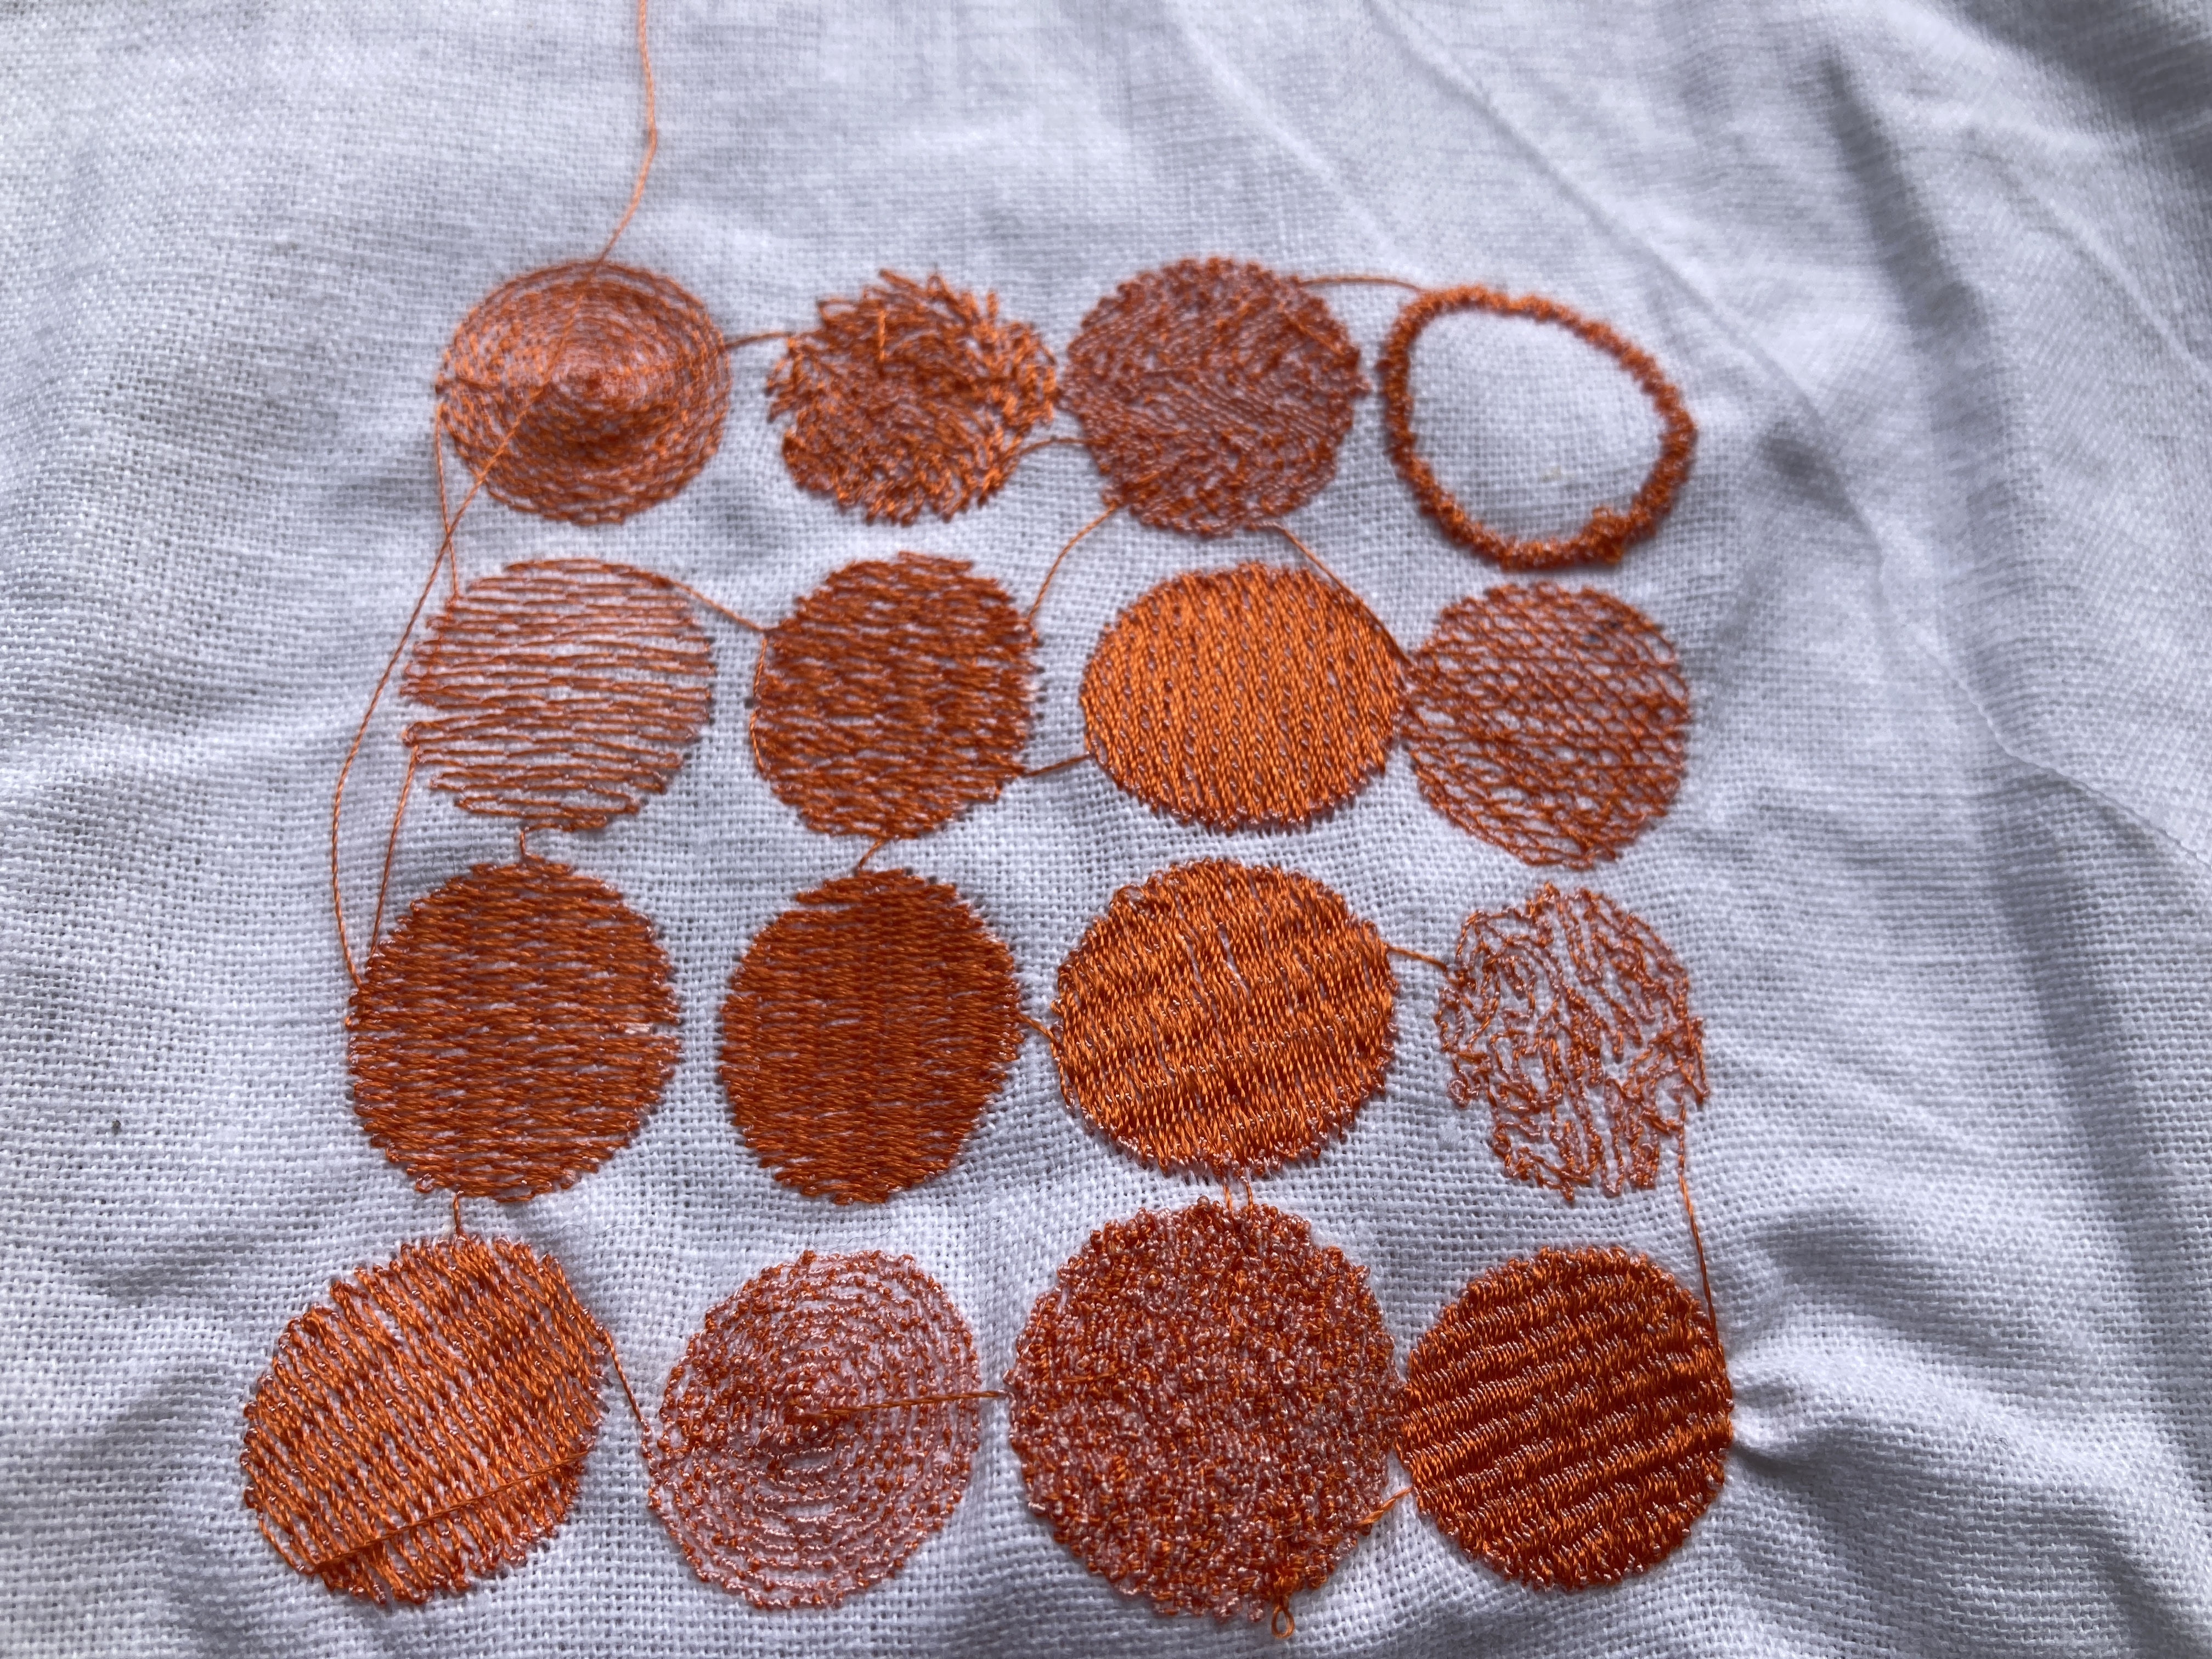 12 embroidered circles in a grid with different patterns 